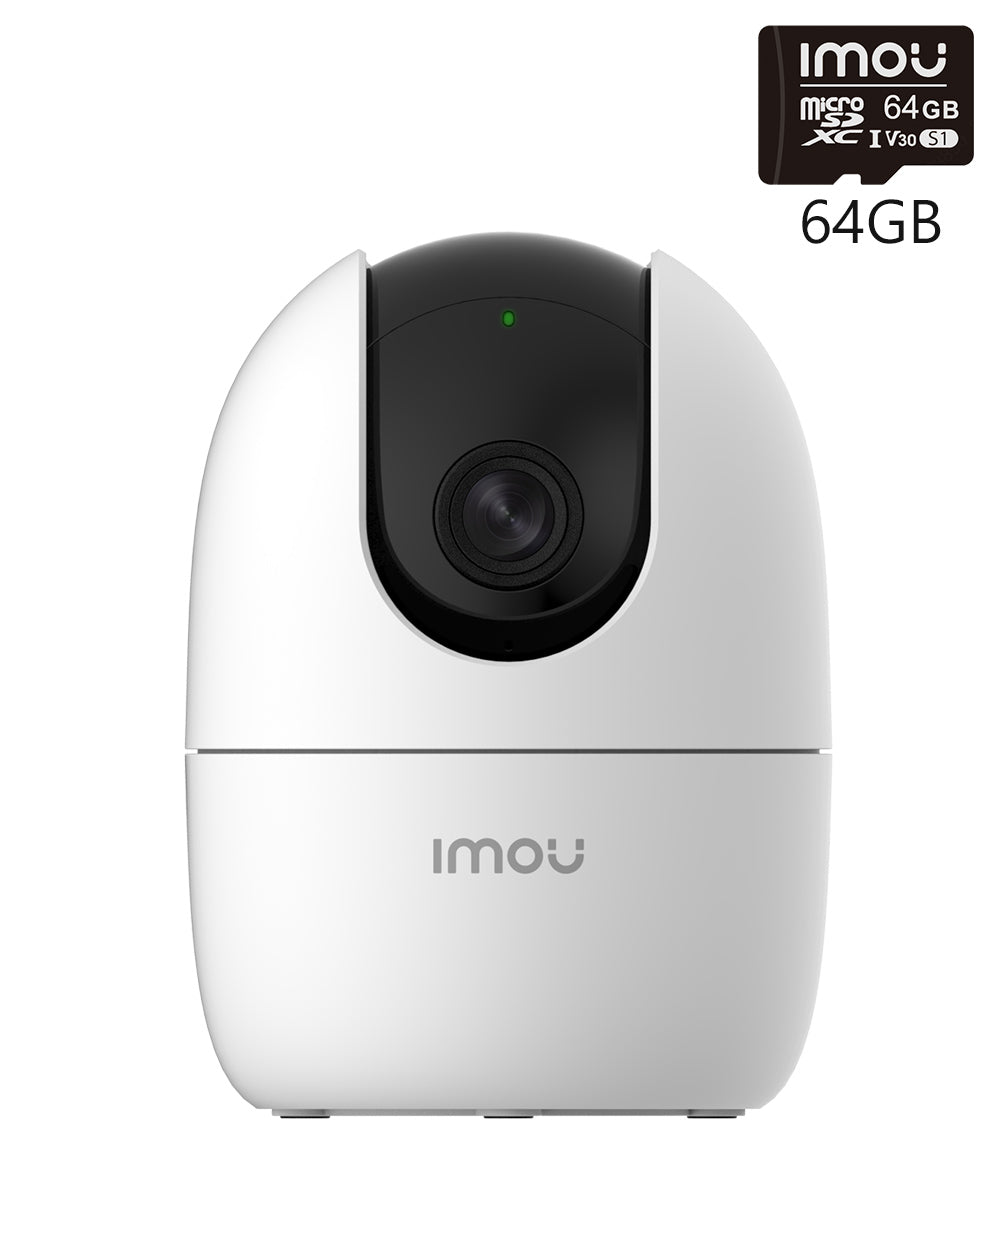 IMOU Ranger 2C 4MP Security Camera - My Helpful Hints® - Review